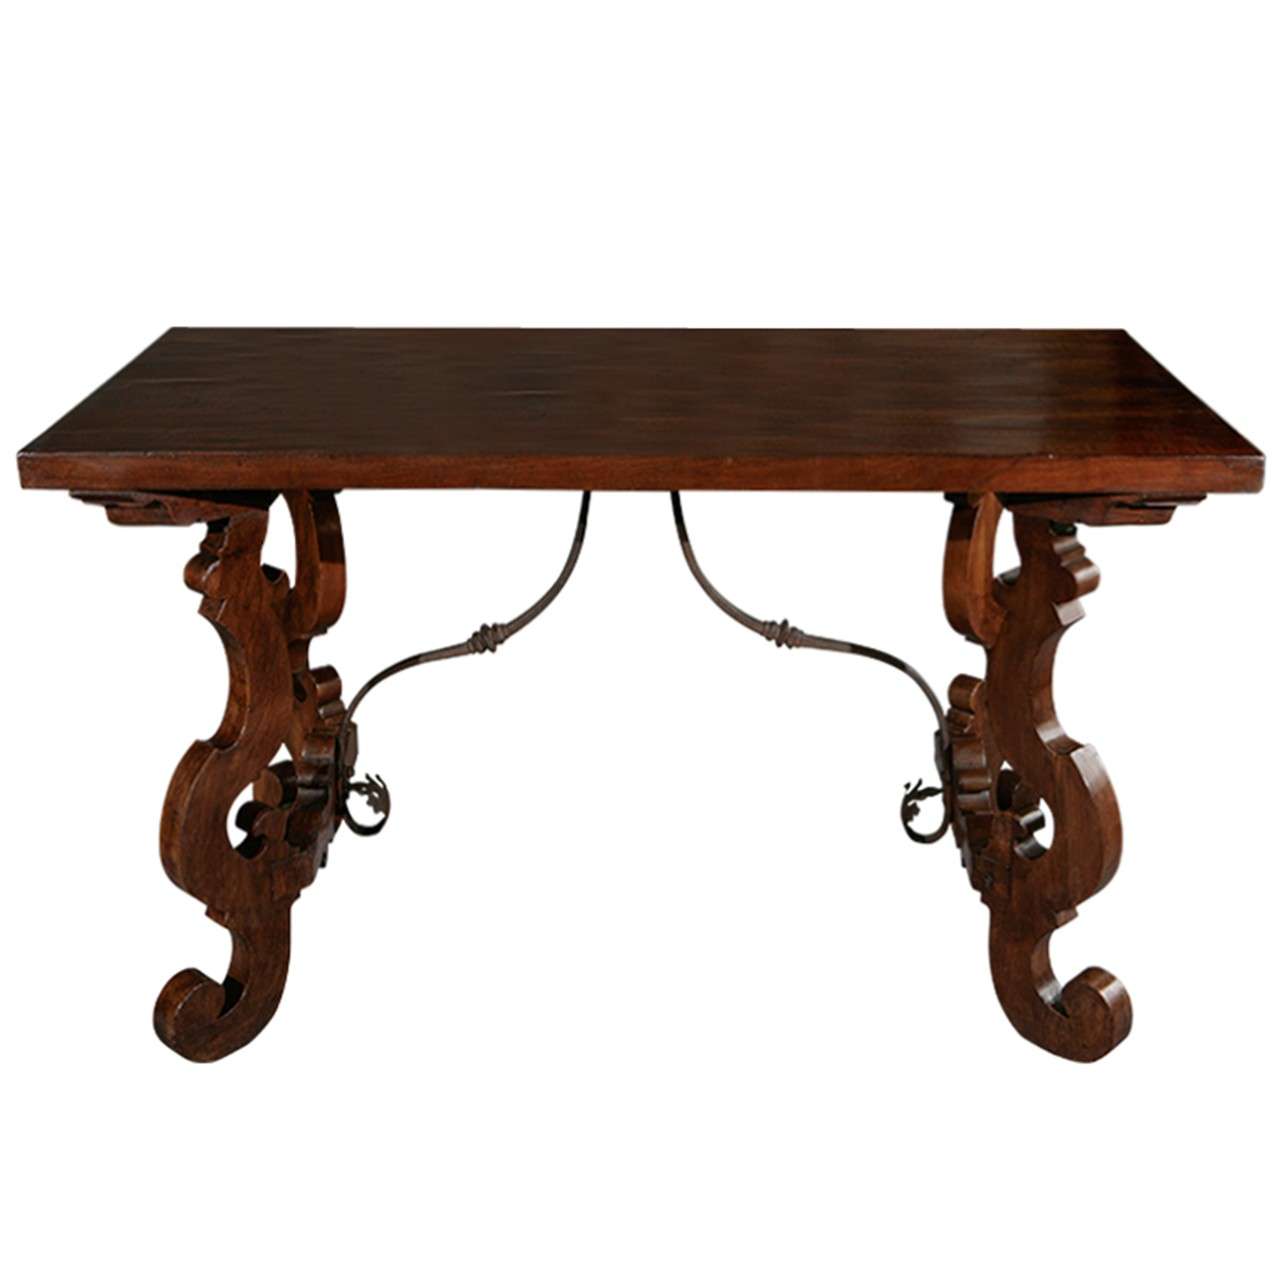 Tuscan Table with Iron Trestle